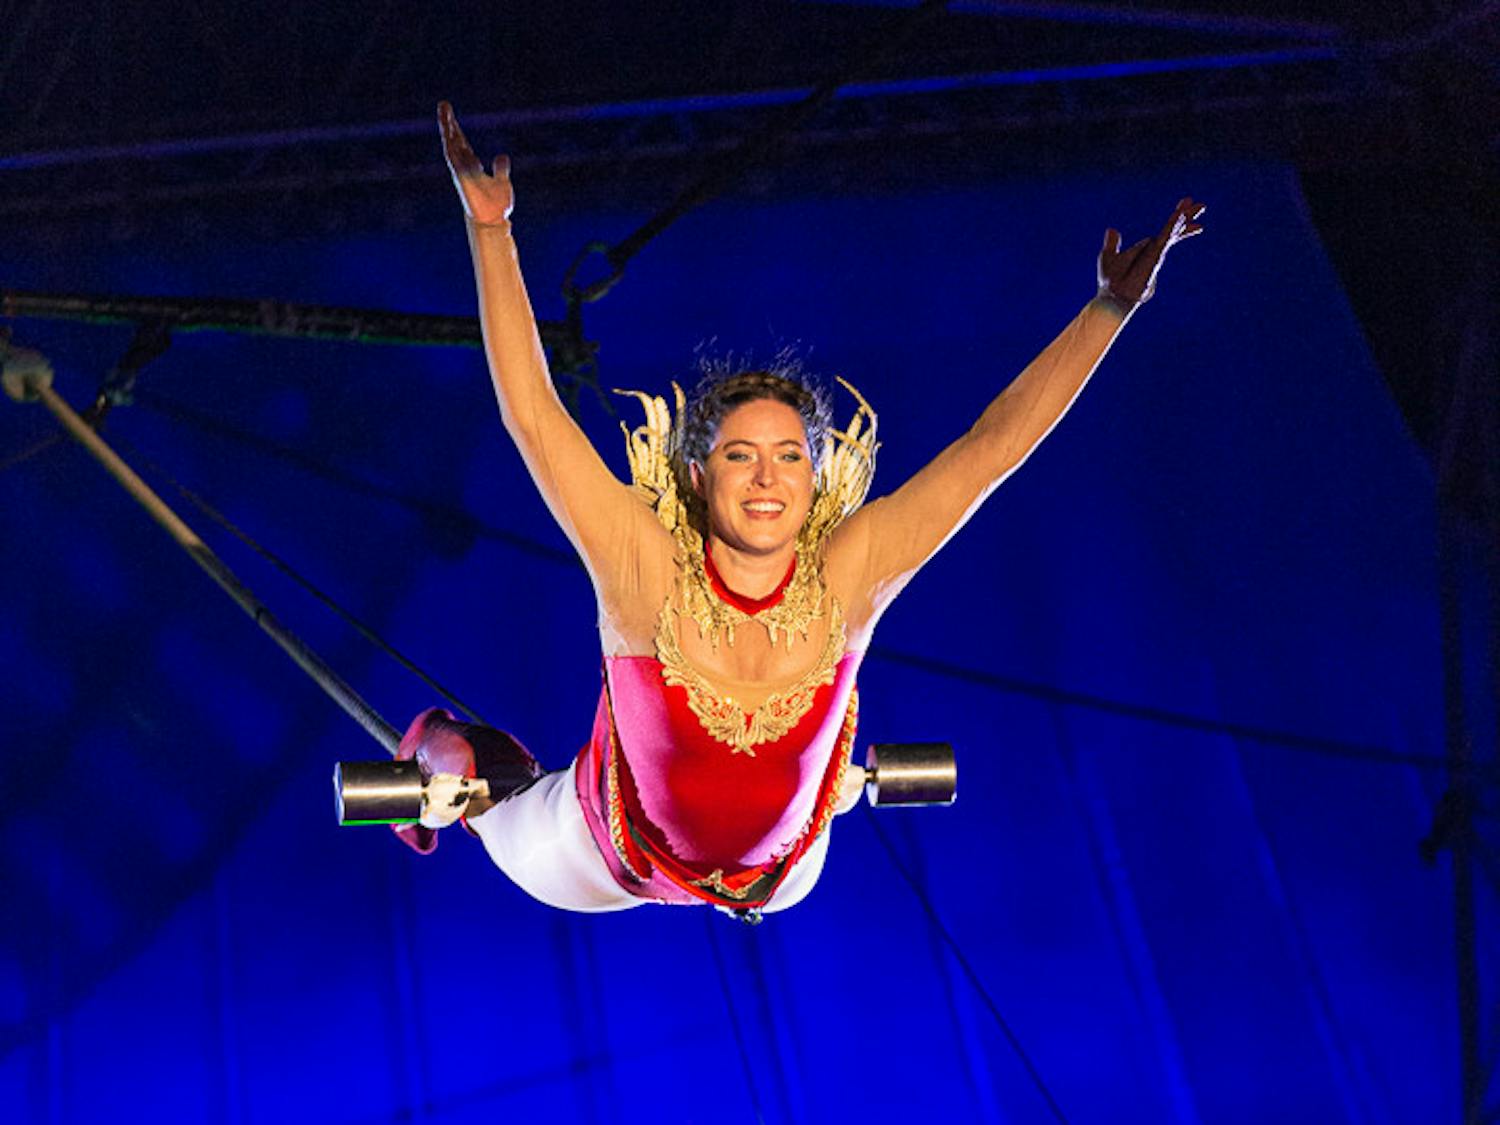 Trapeze artist Disharmony looks out to the crowd as she descends towards the middle of the circus during her act at the South Carolina State Fair circus on Oct. 18, 2022. The circus and state fair took place from Oct. 12-23. 2022.